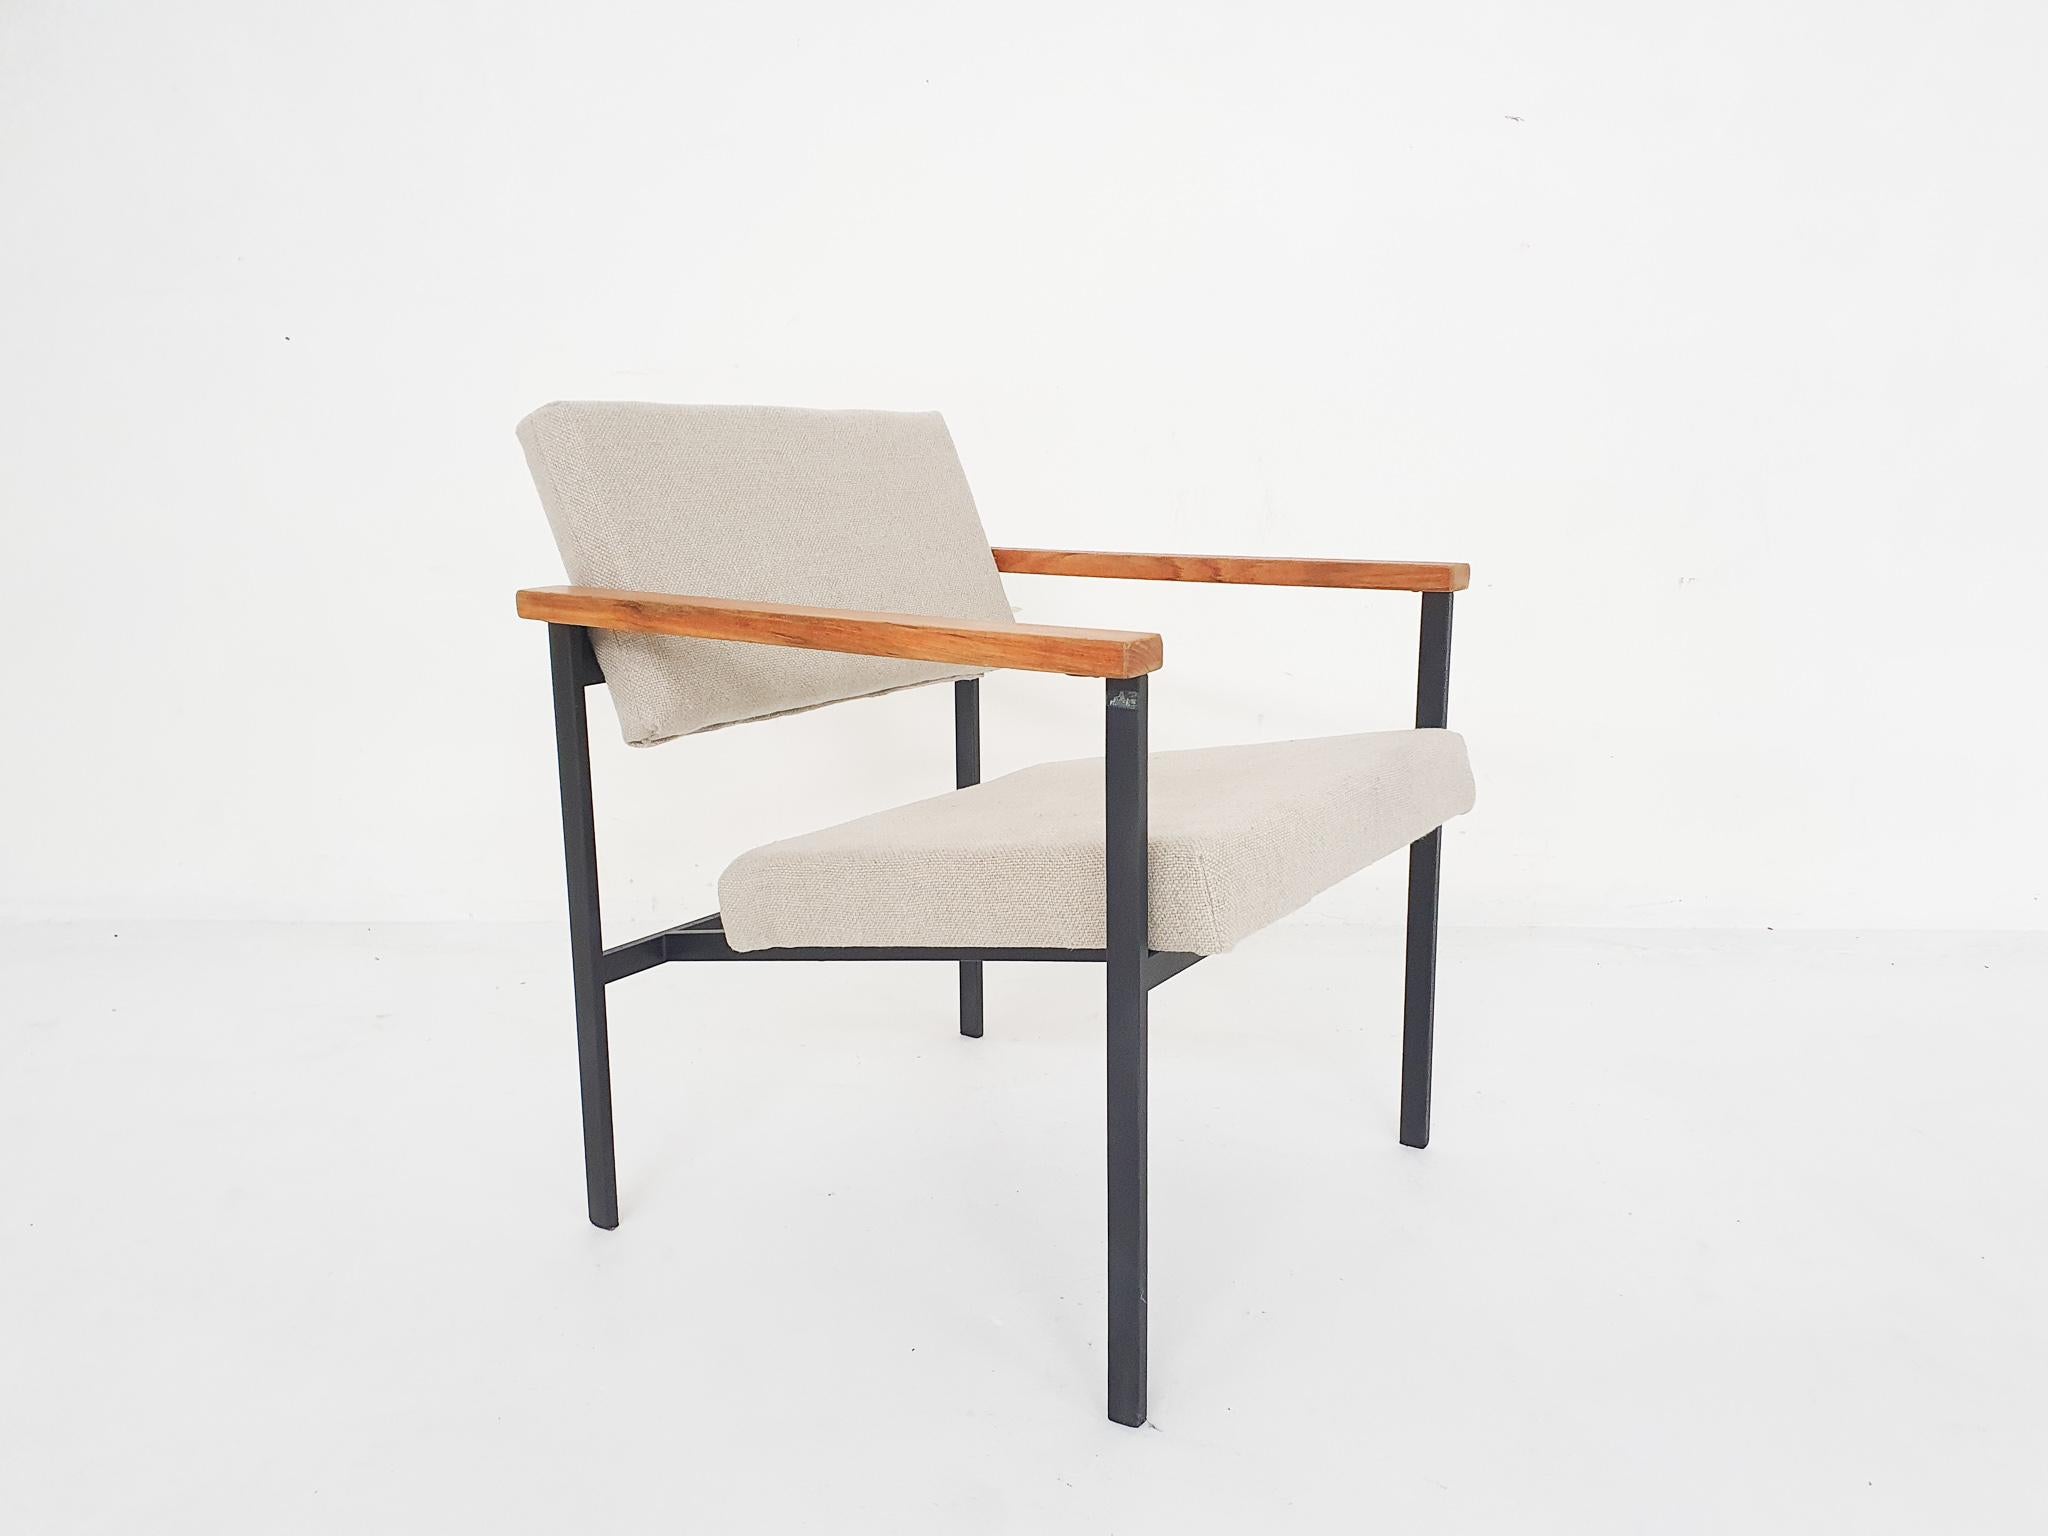 Metal Minimalistic lounge chair by Marko, The Netherlands, 1960's